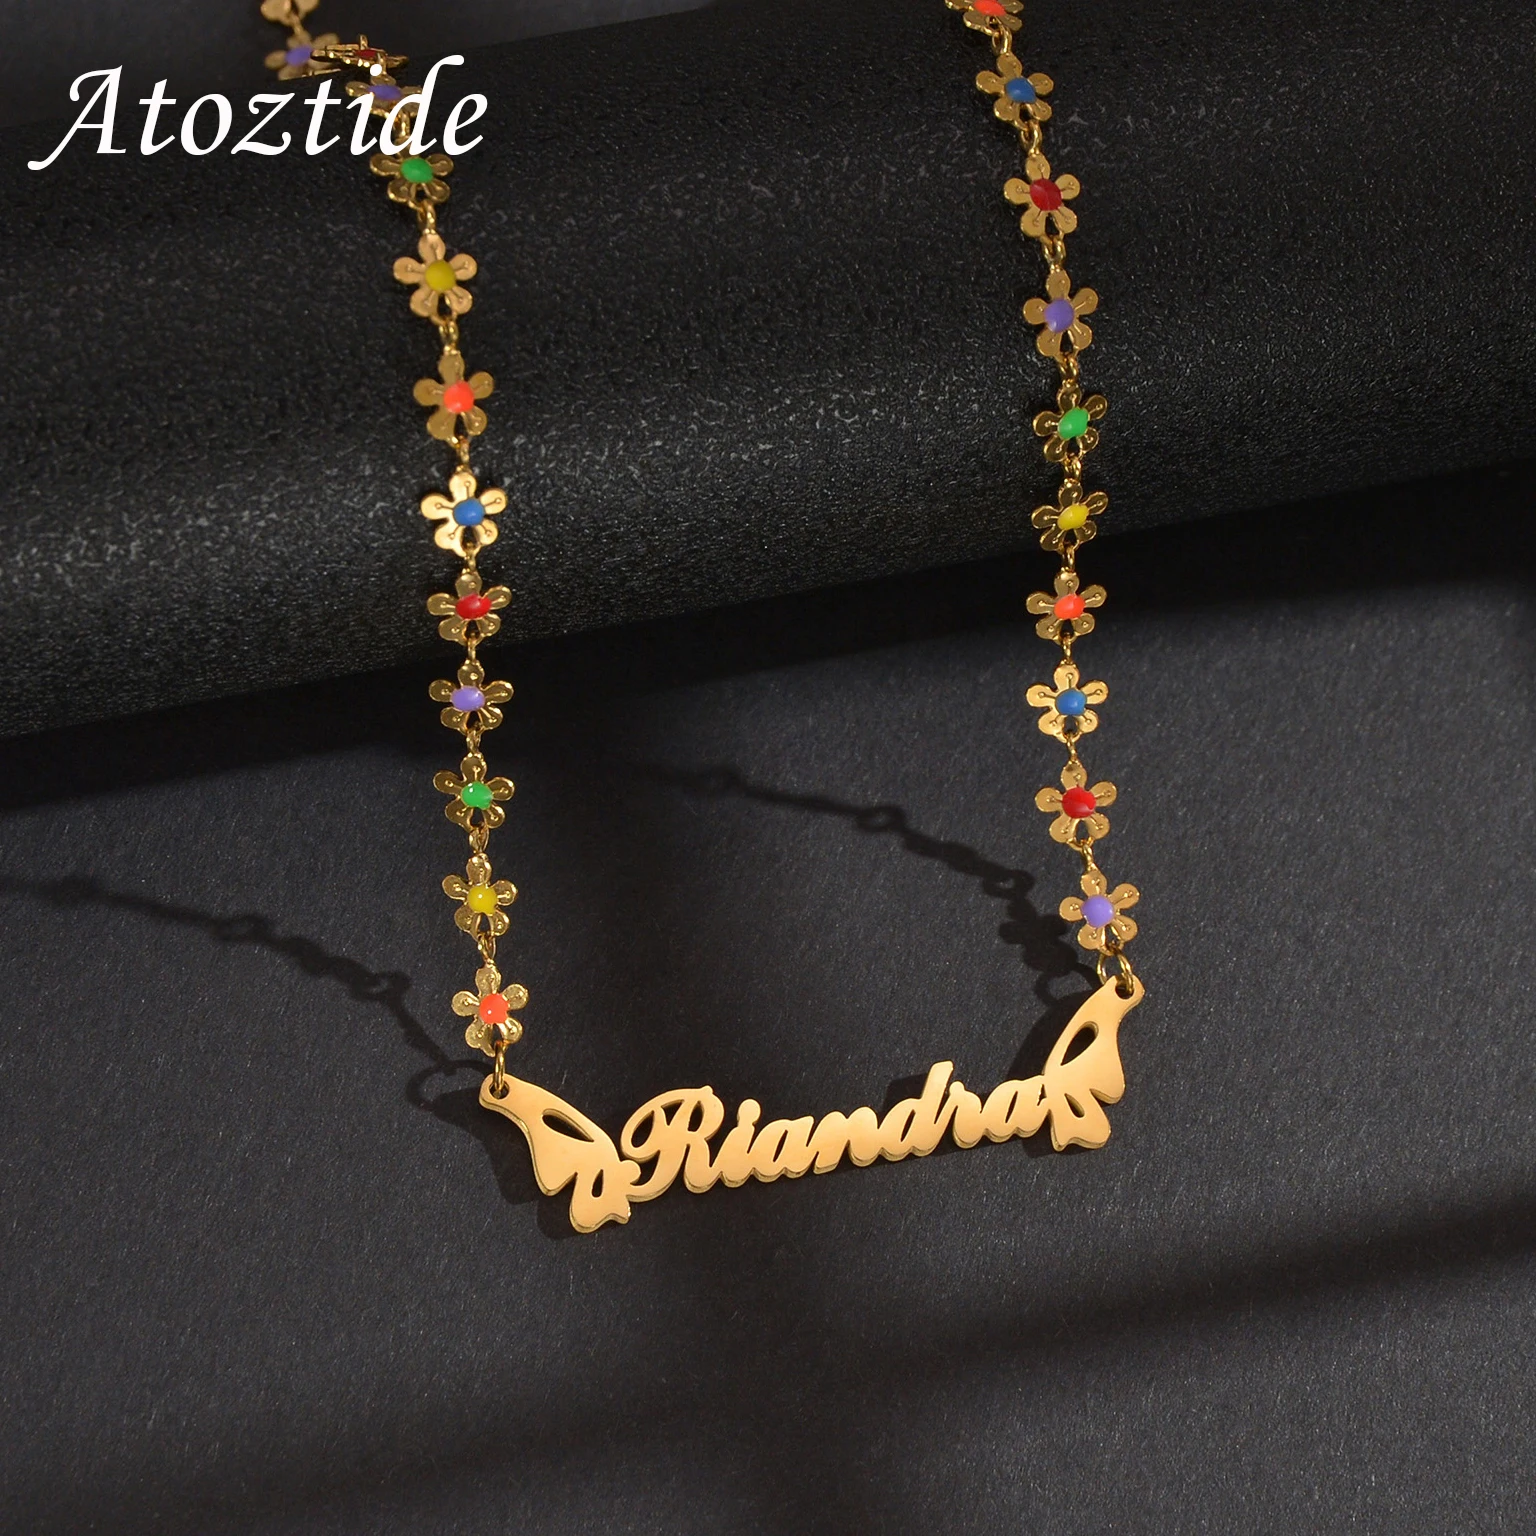 Atoztide Personalized Custom Name Necklace for Women Oil Flower Link Chain Stainless Steel Letter Fashion Pendant Jewelry Gift bracelet s925 silver 14mm extending buckle two rows cuban link iced out hip hop moissanite link chain jewelry women men gifts